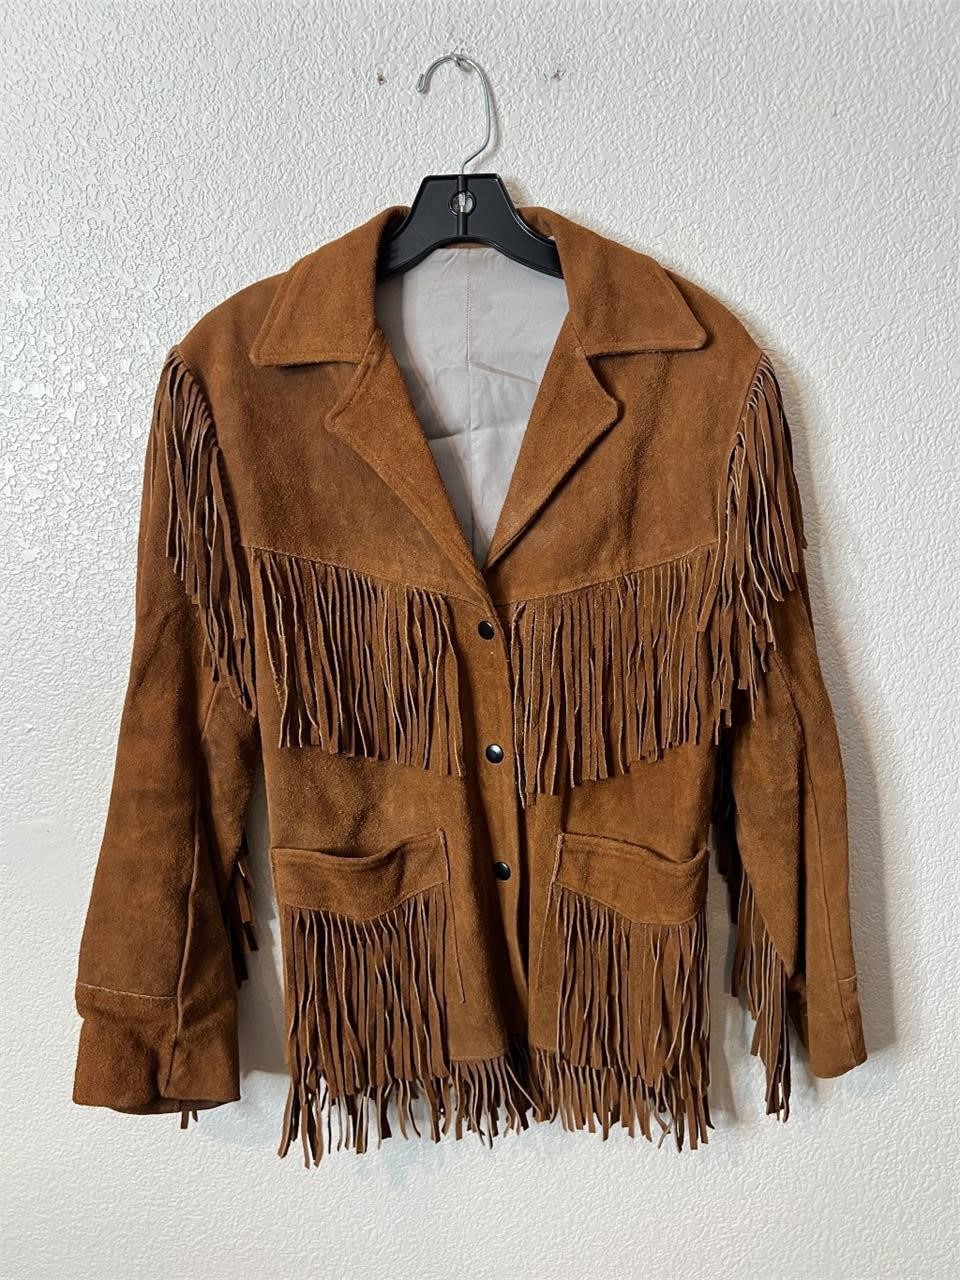 5/20/24 Vintage Clothing Auction